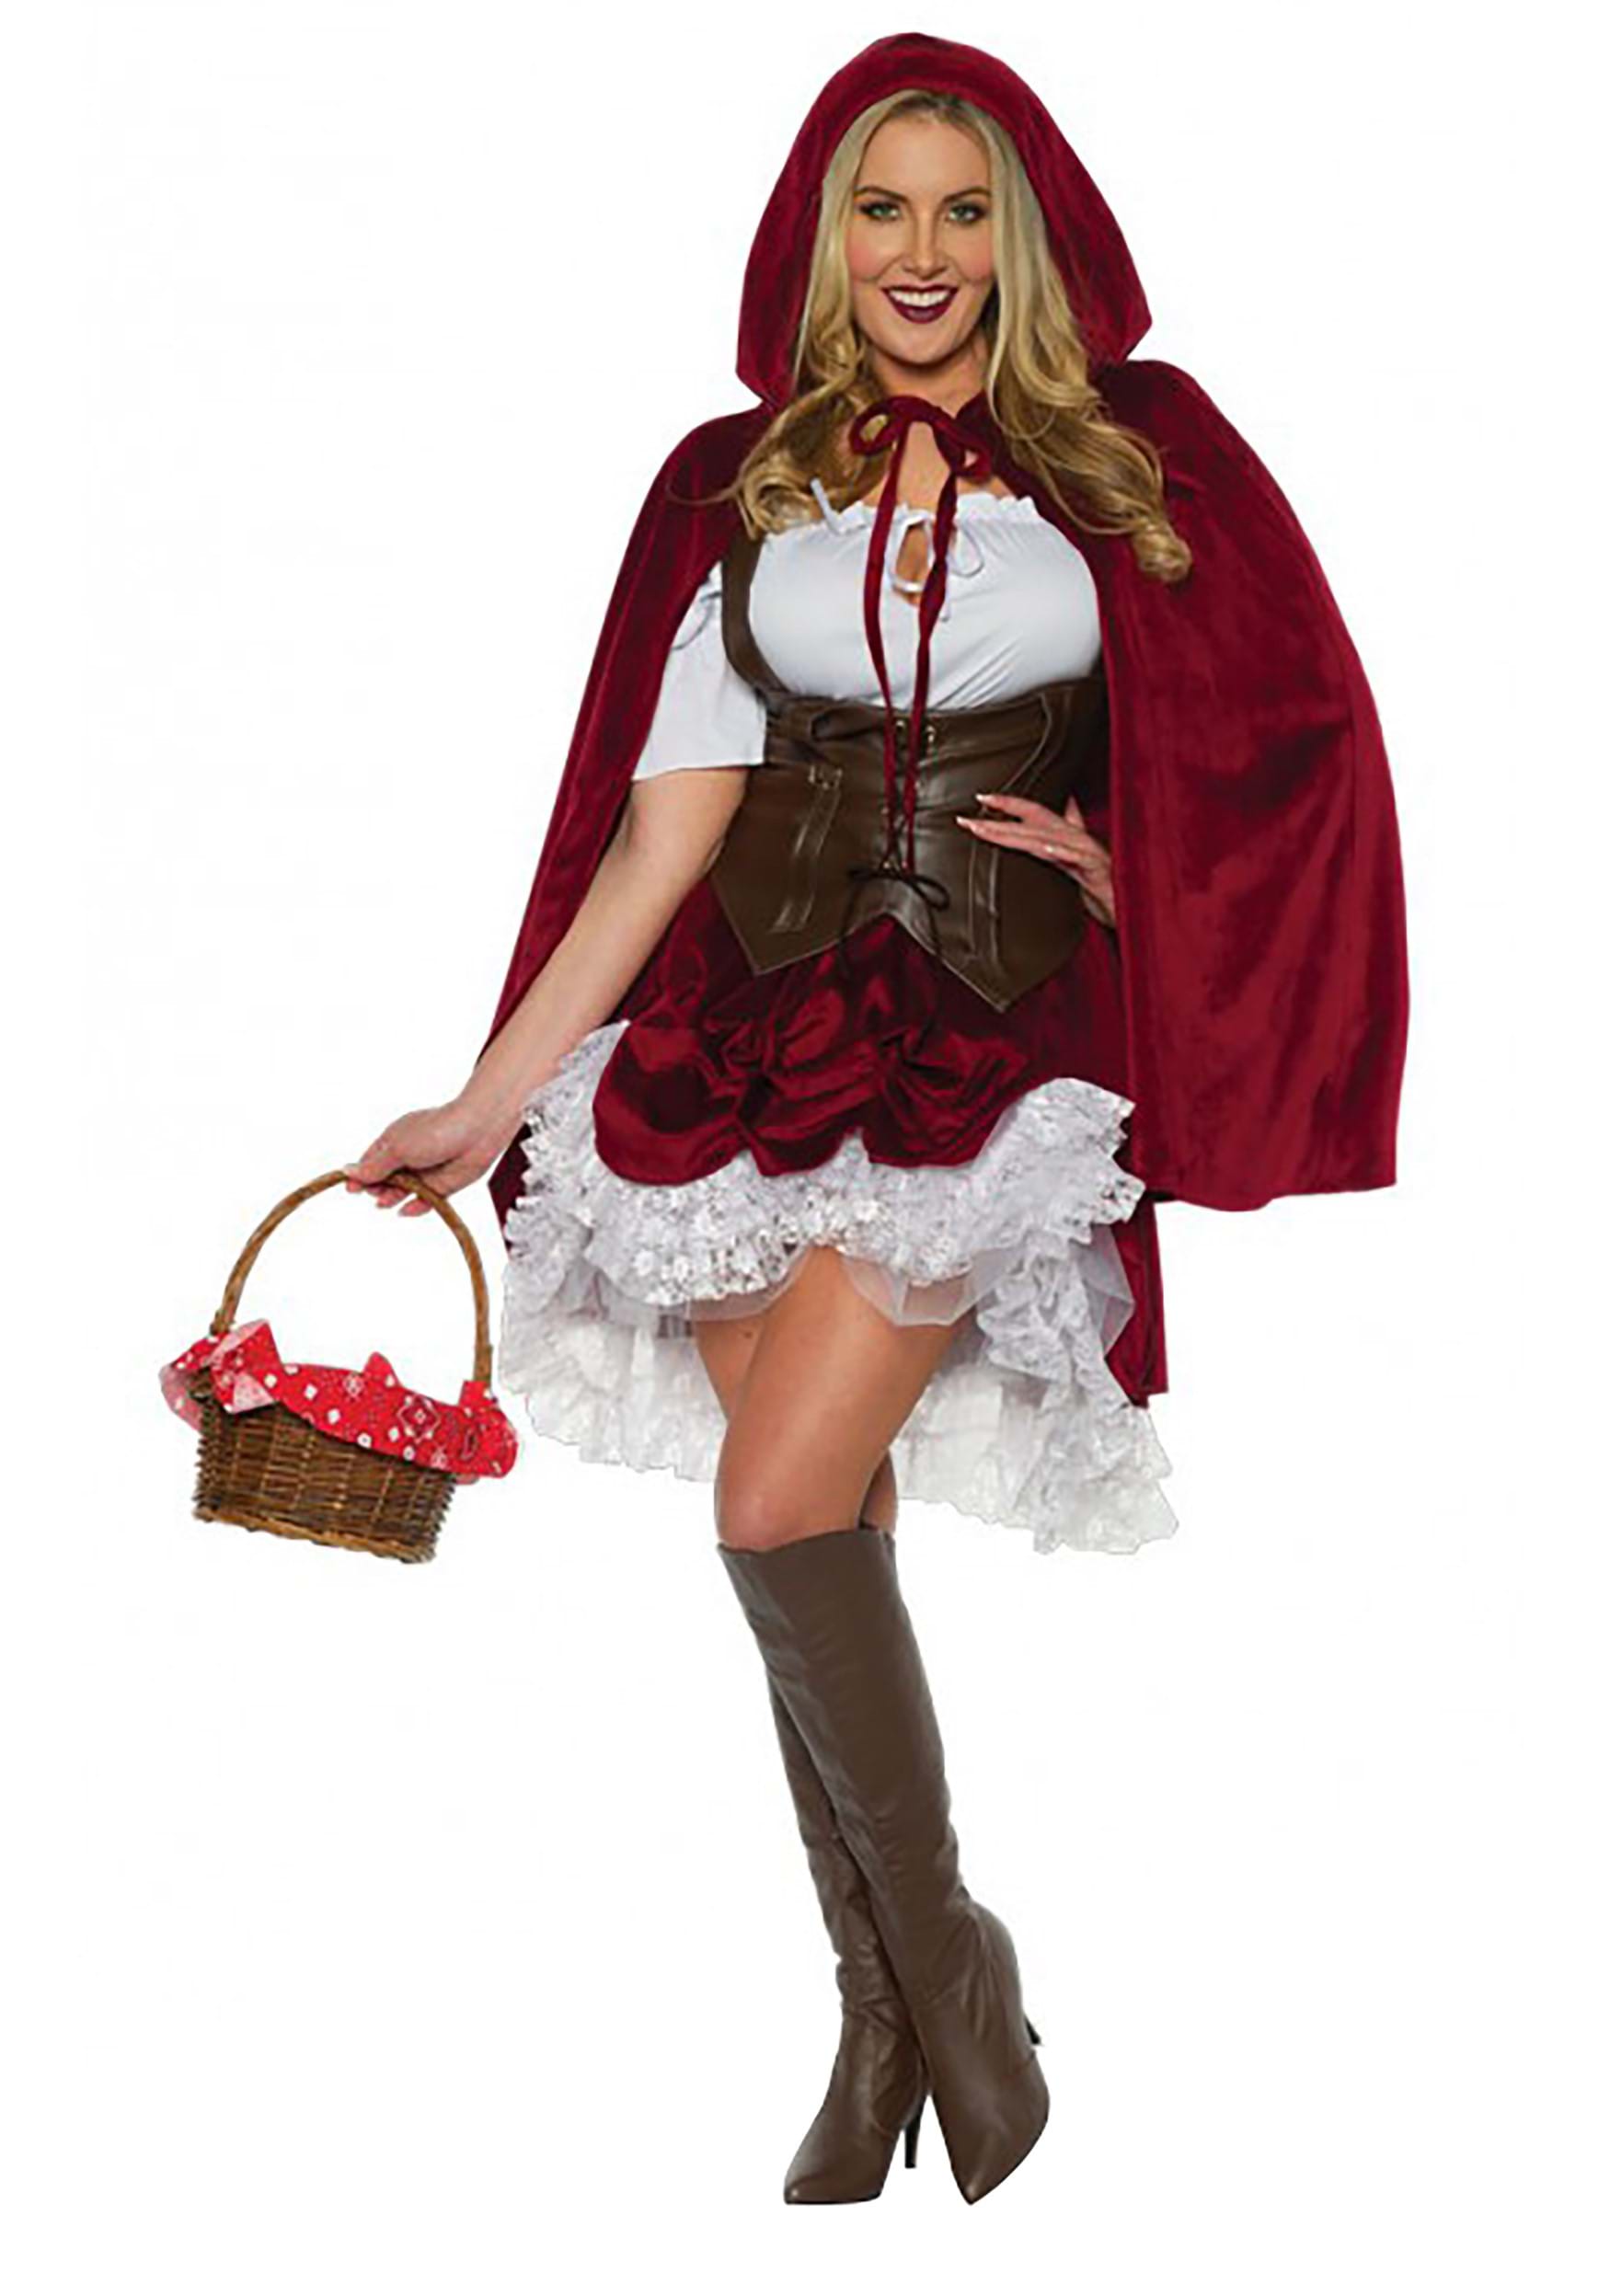 Image of Deluxe Red Riding Hood Costume For Adults ID UN29923-S